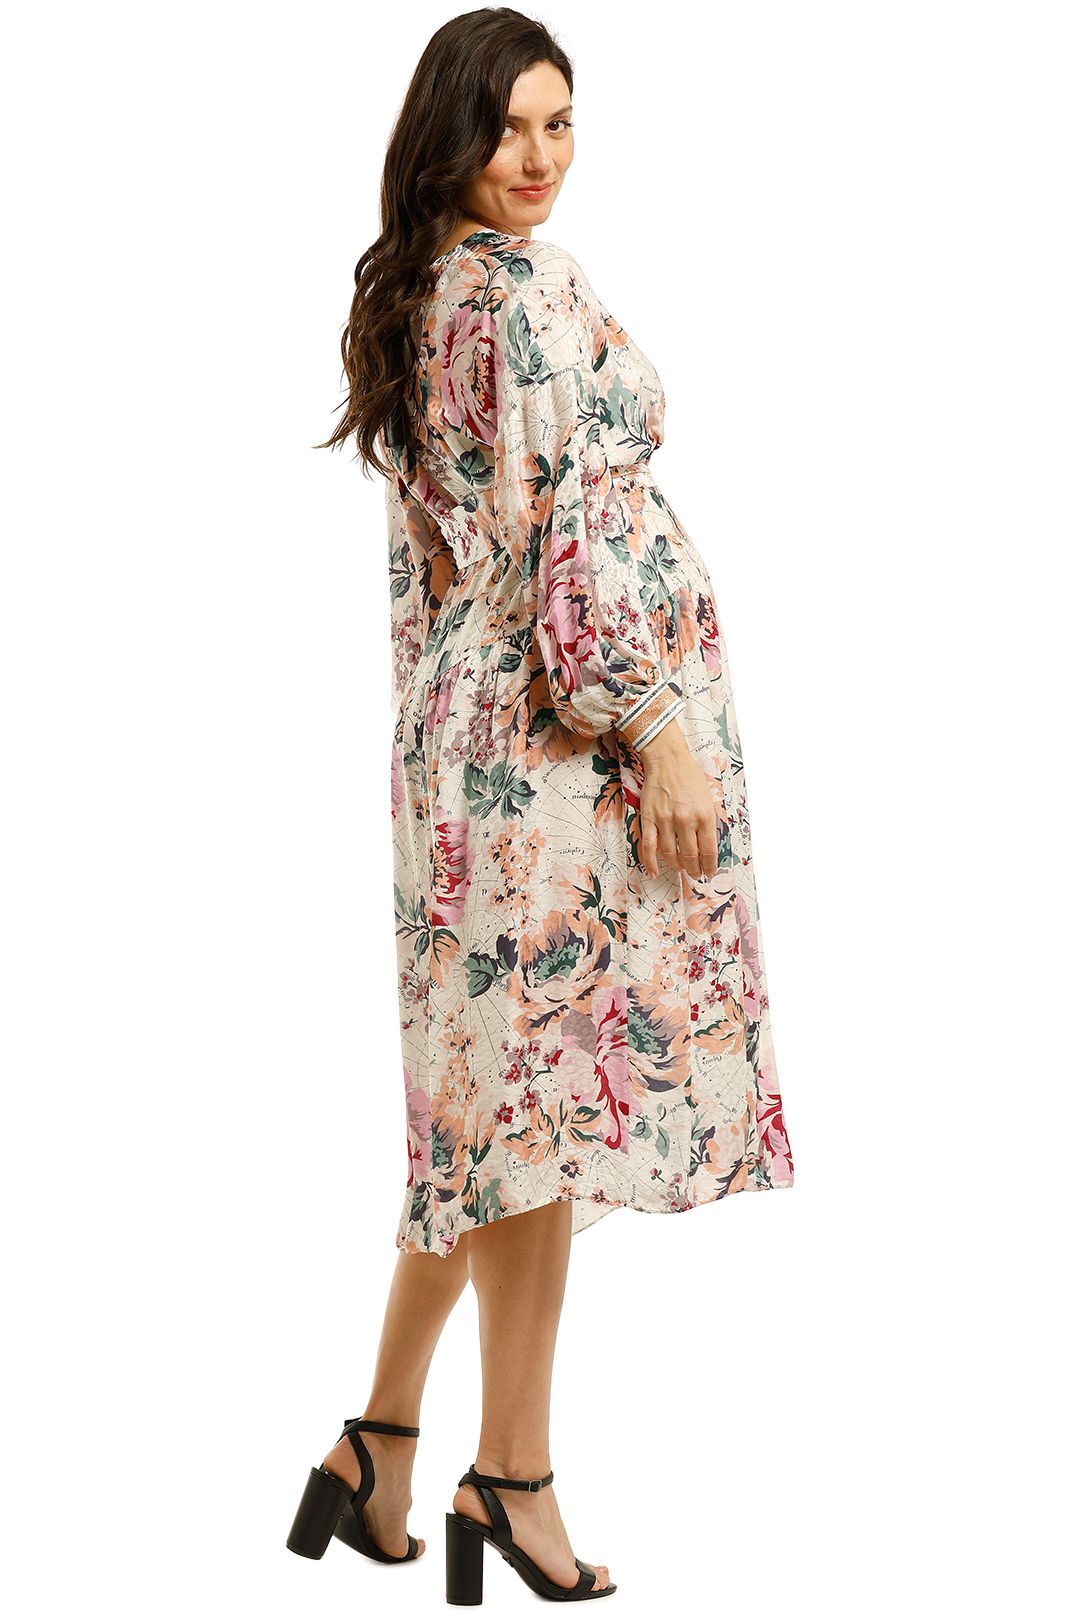 Ginger-And-Smart-Floral-Charts-Wrap-Dress-Floral-White-Back